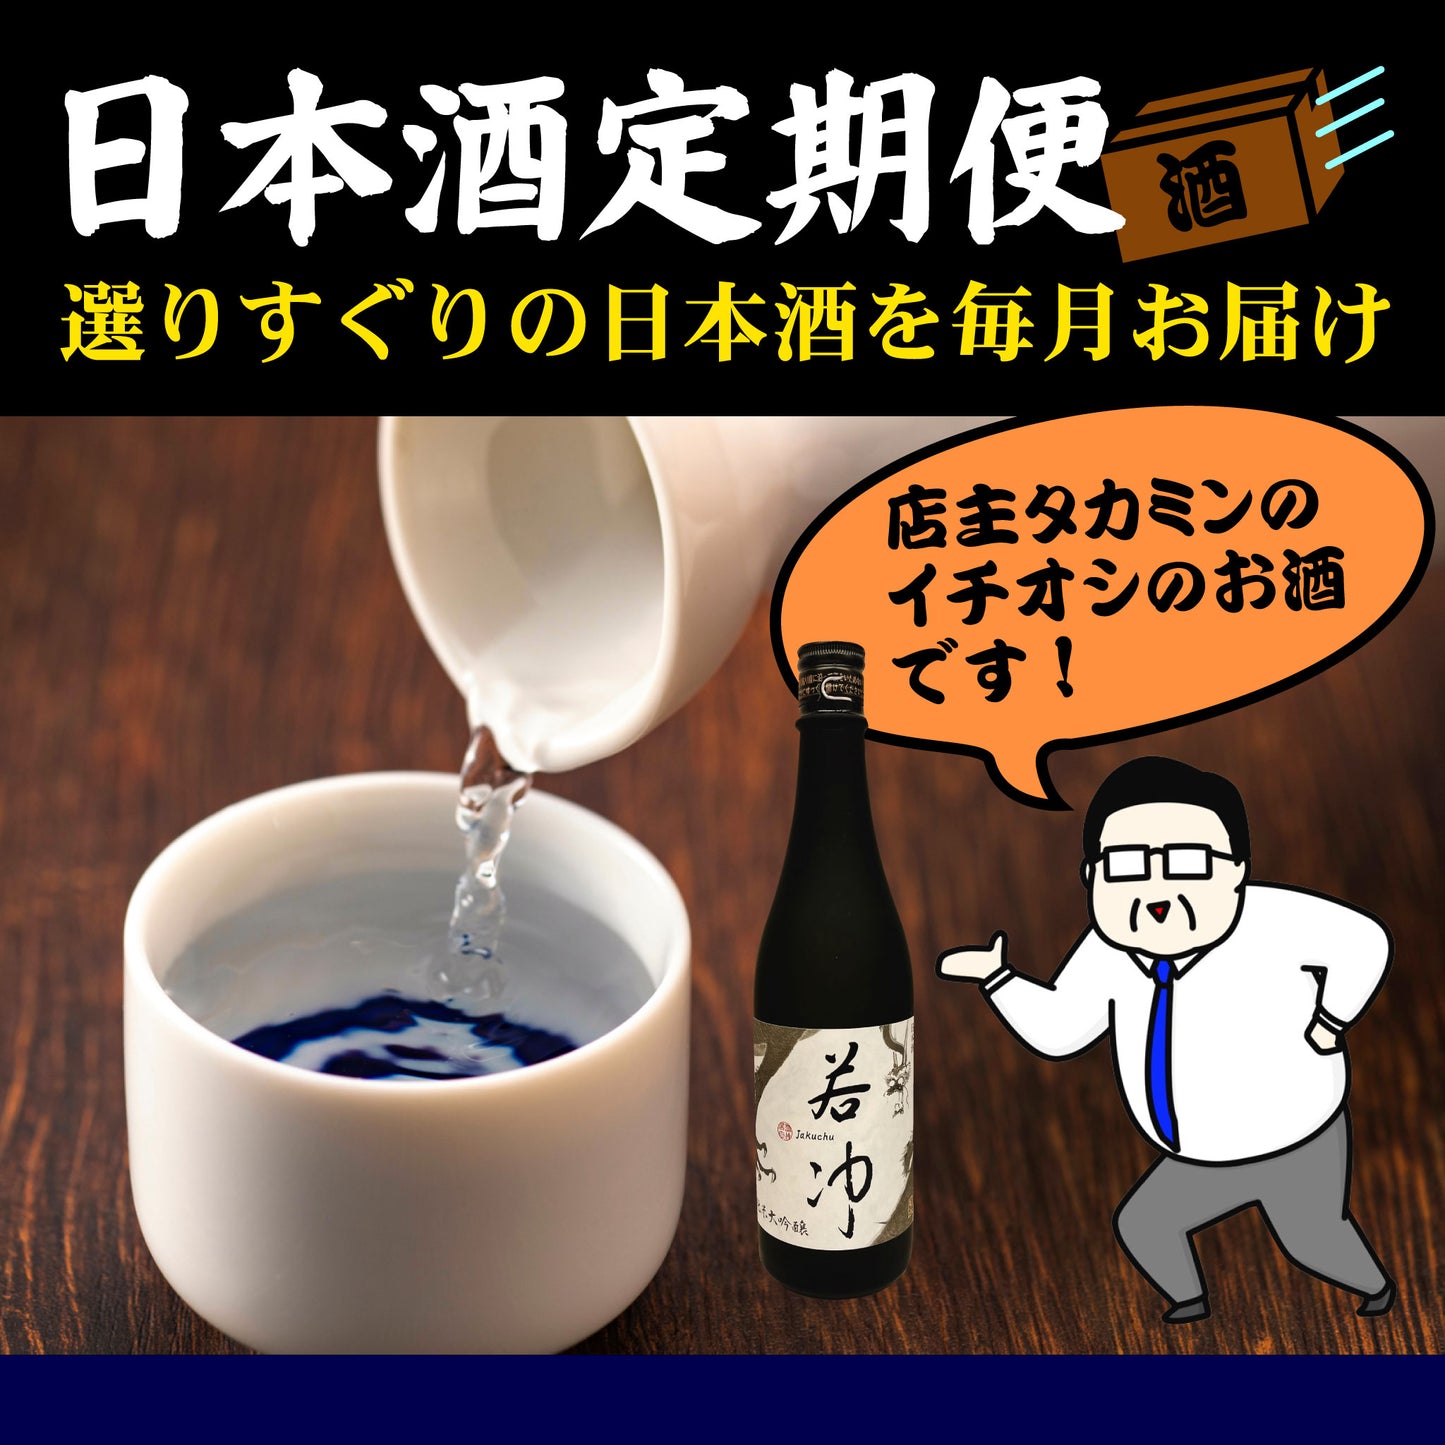 <Regular flights for home> We will deliver Takamin's recommended sake to your home every month! [3 months premium course]